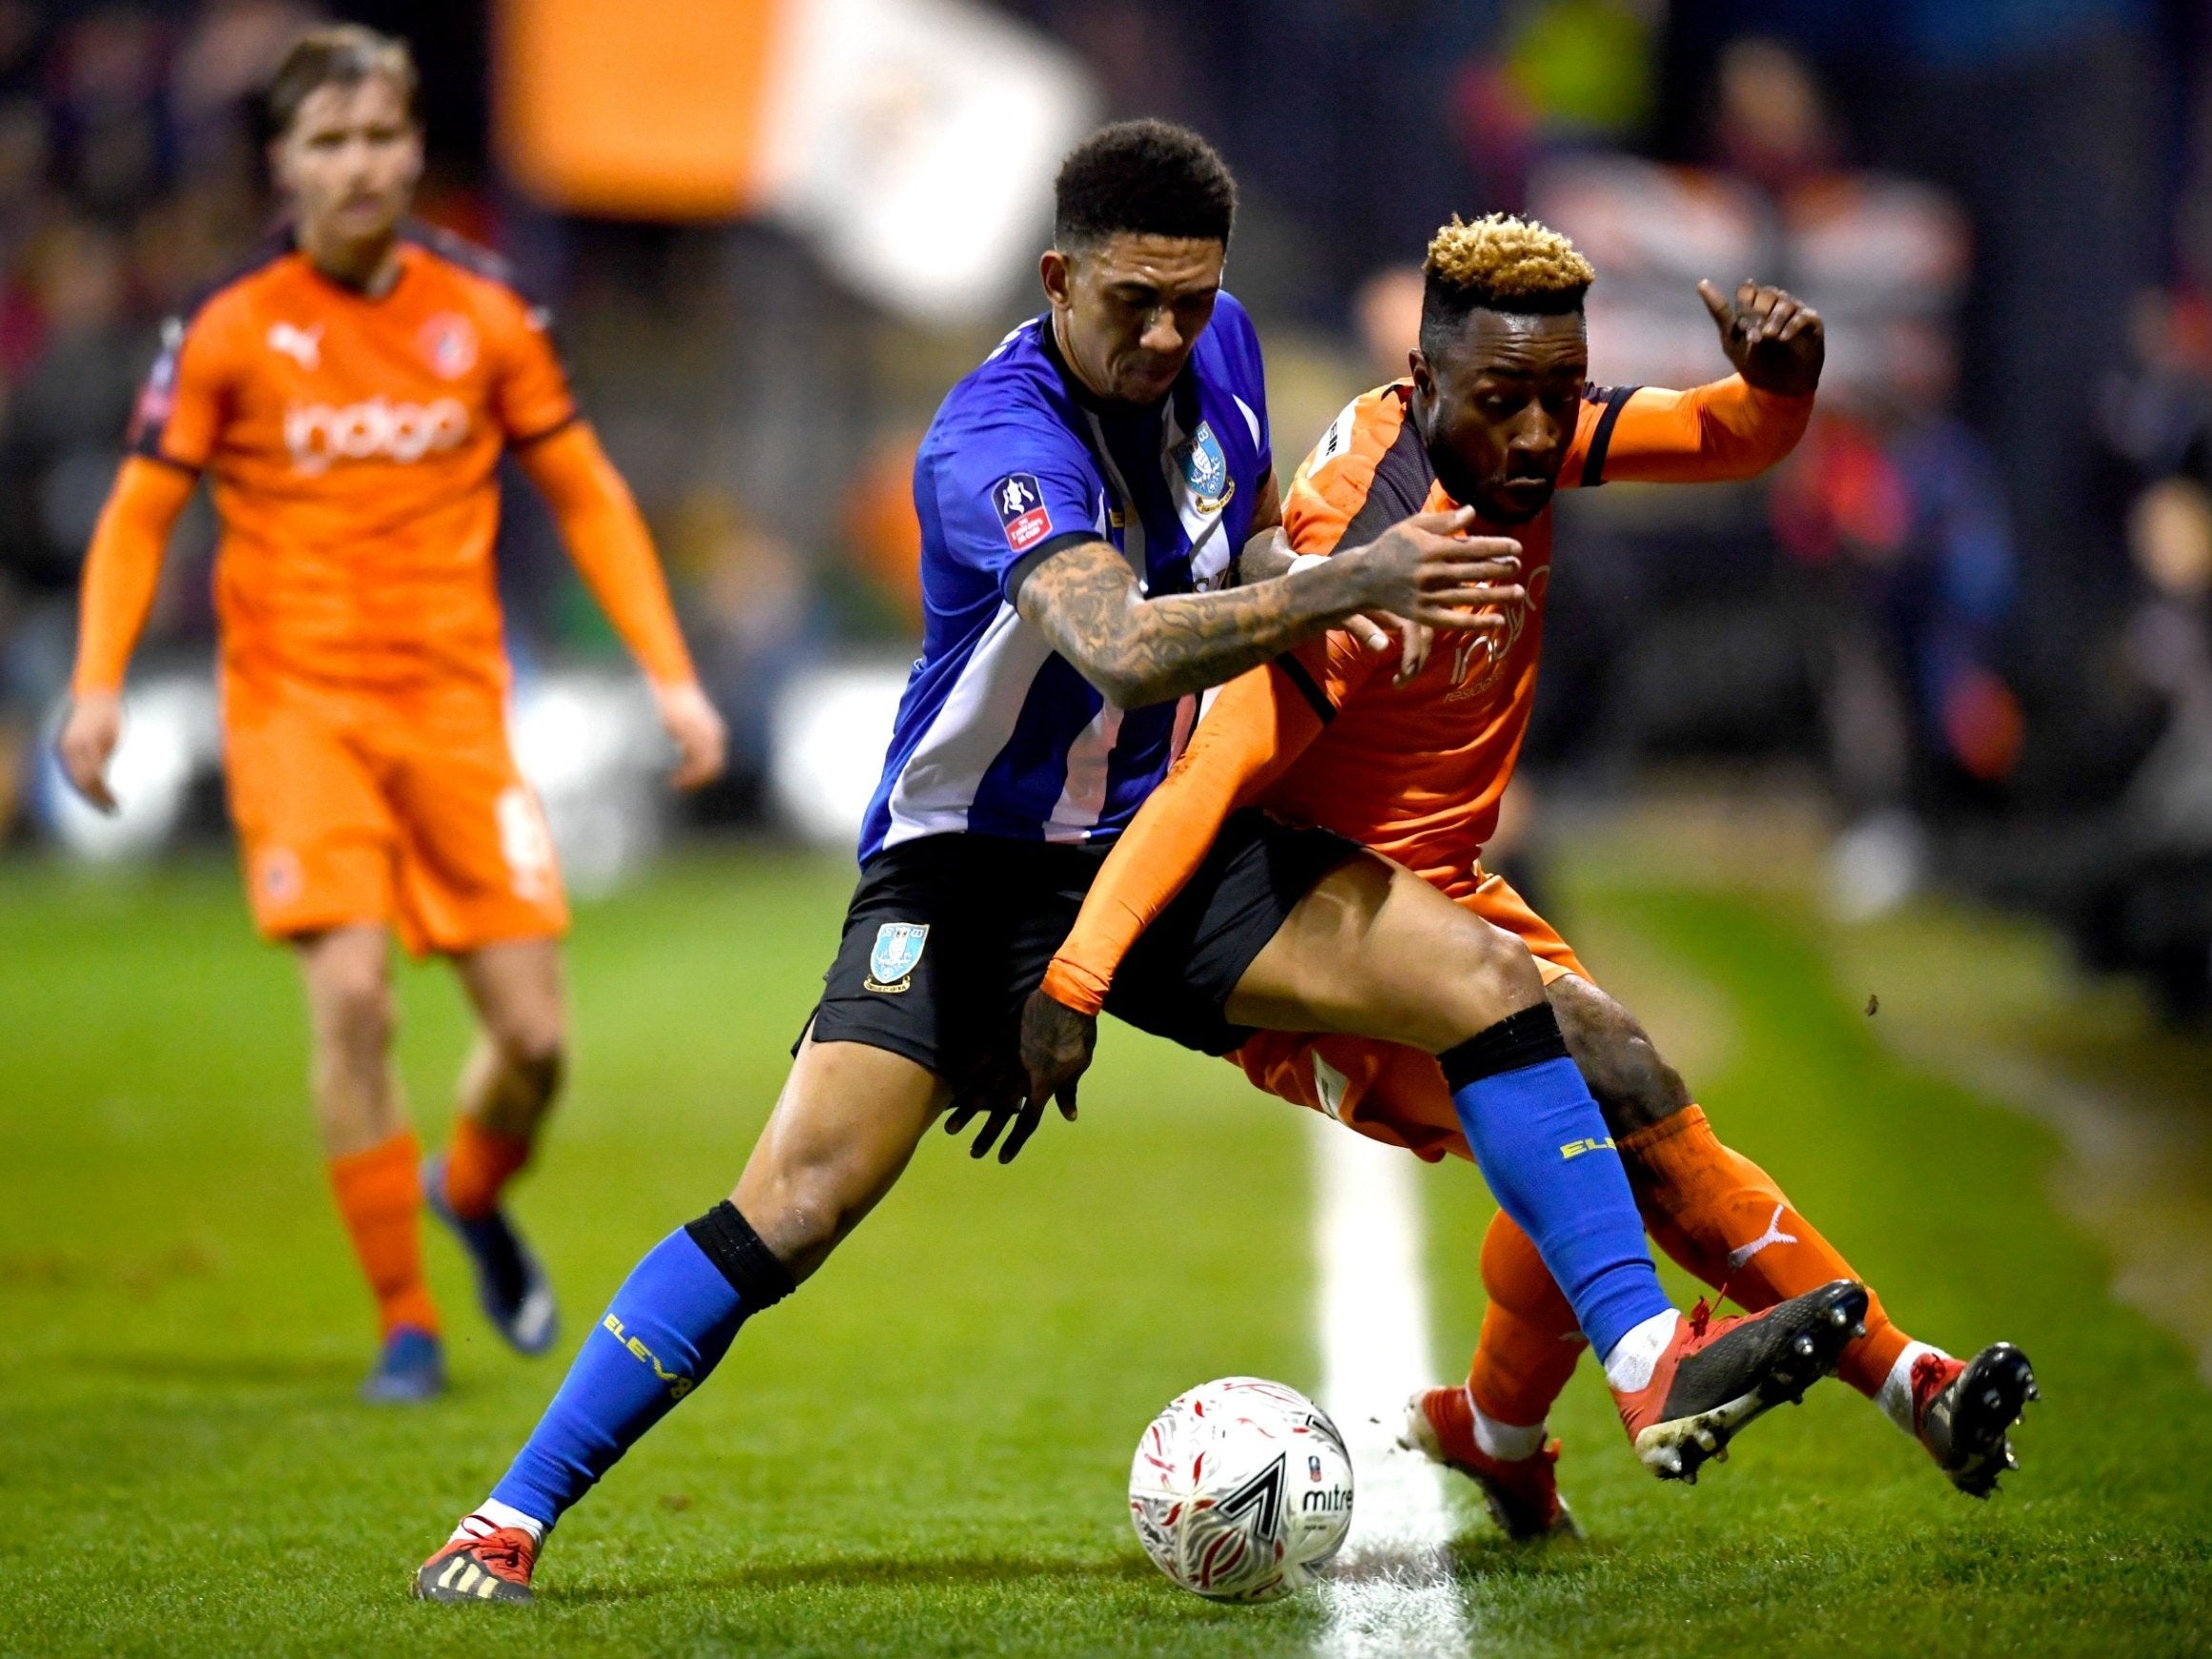 Luton Town vs Sheffield Wednesday Atdhe Nuhiu sends Owls through to the FA Cup fourth round The Independent The Independent